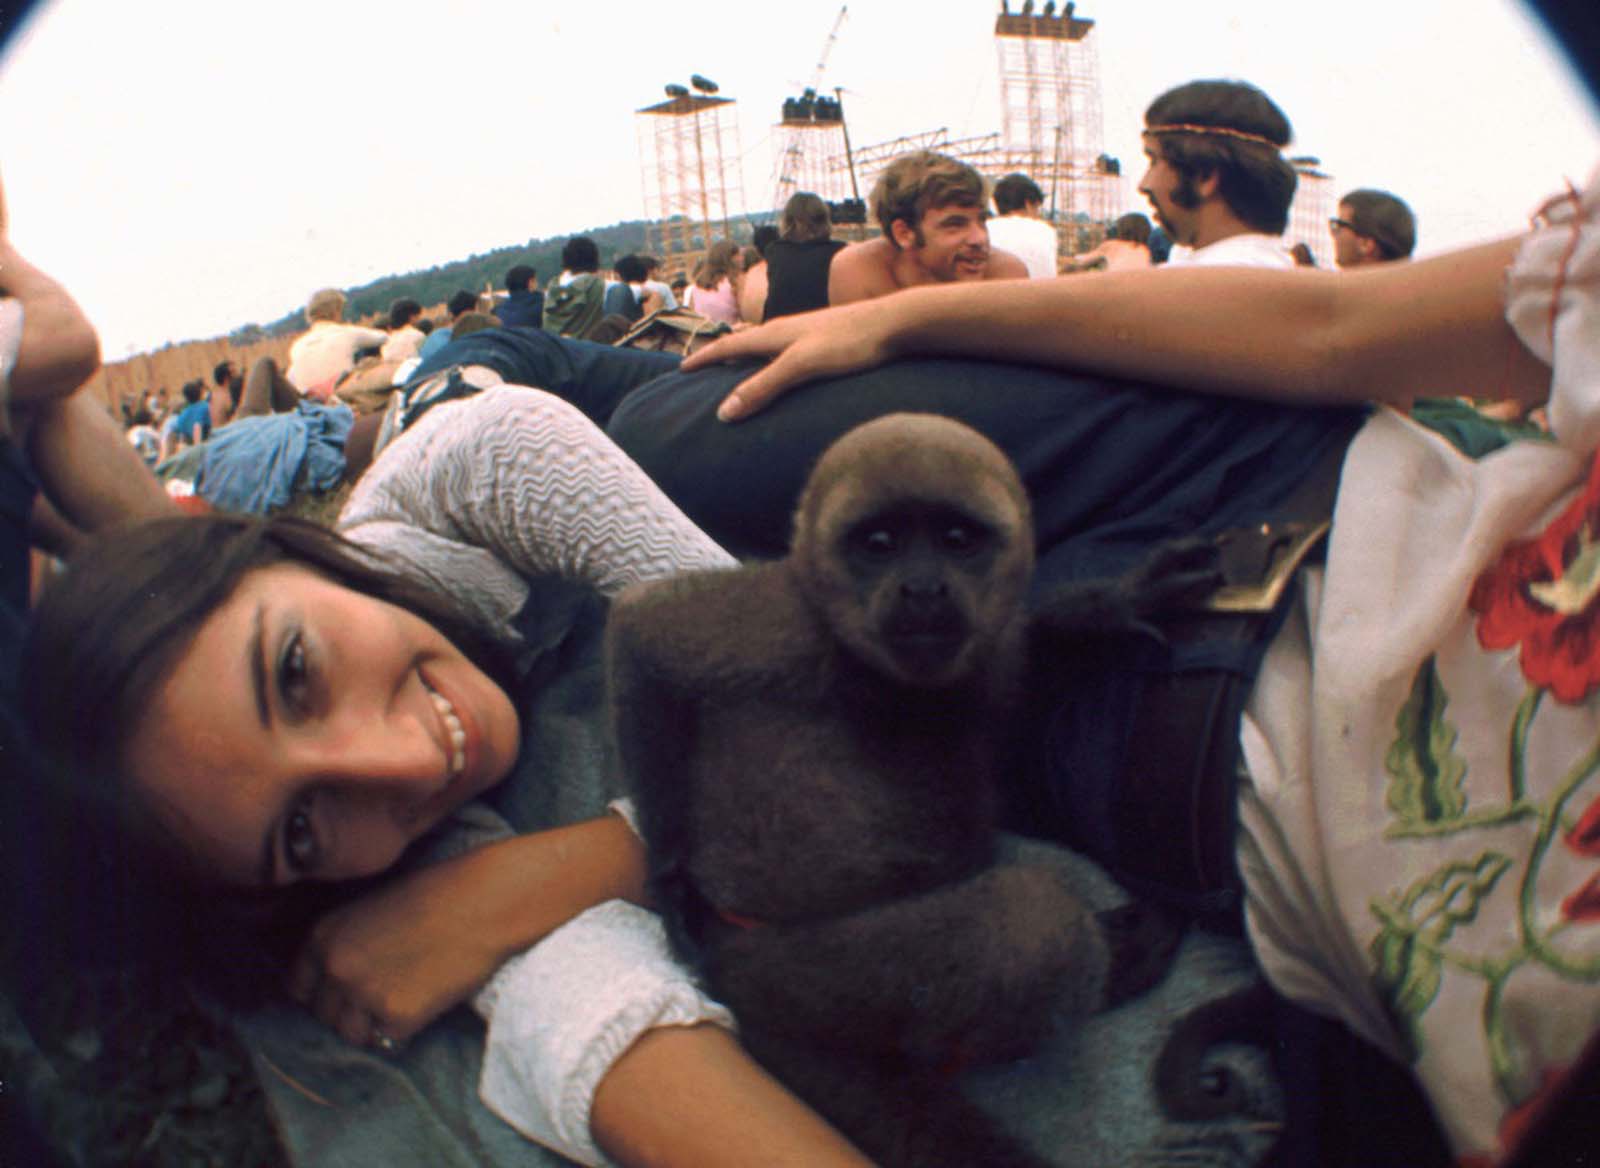 An unidentified woman smiles while her pet monkey sits in the middle of her group.